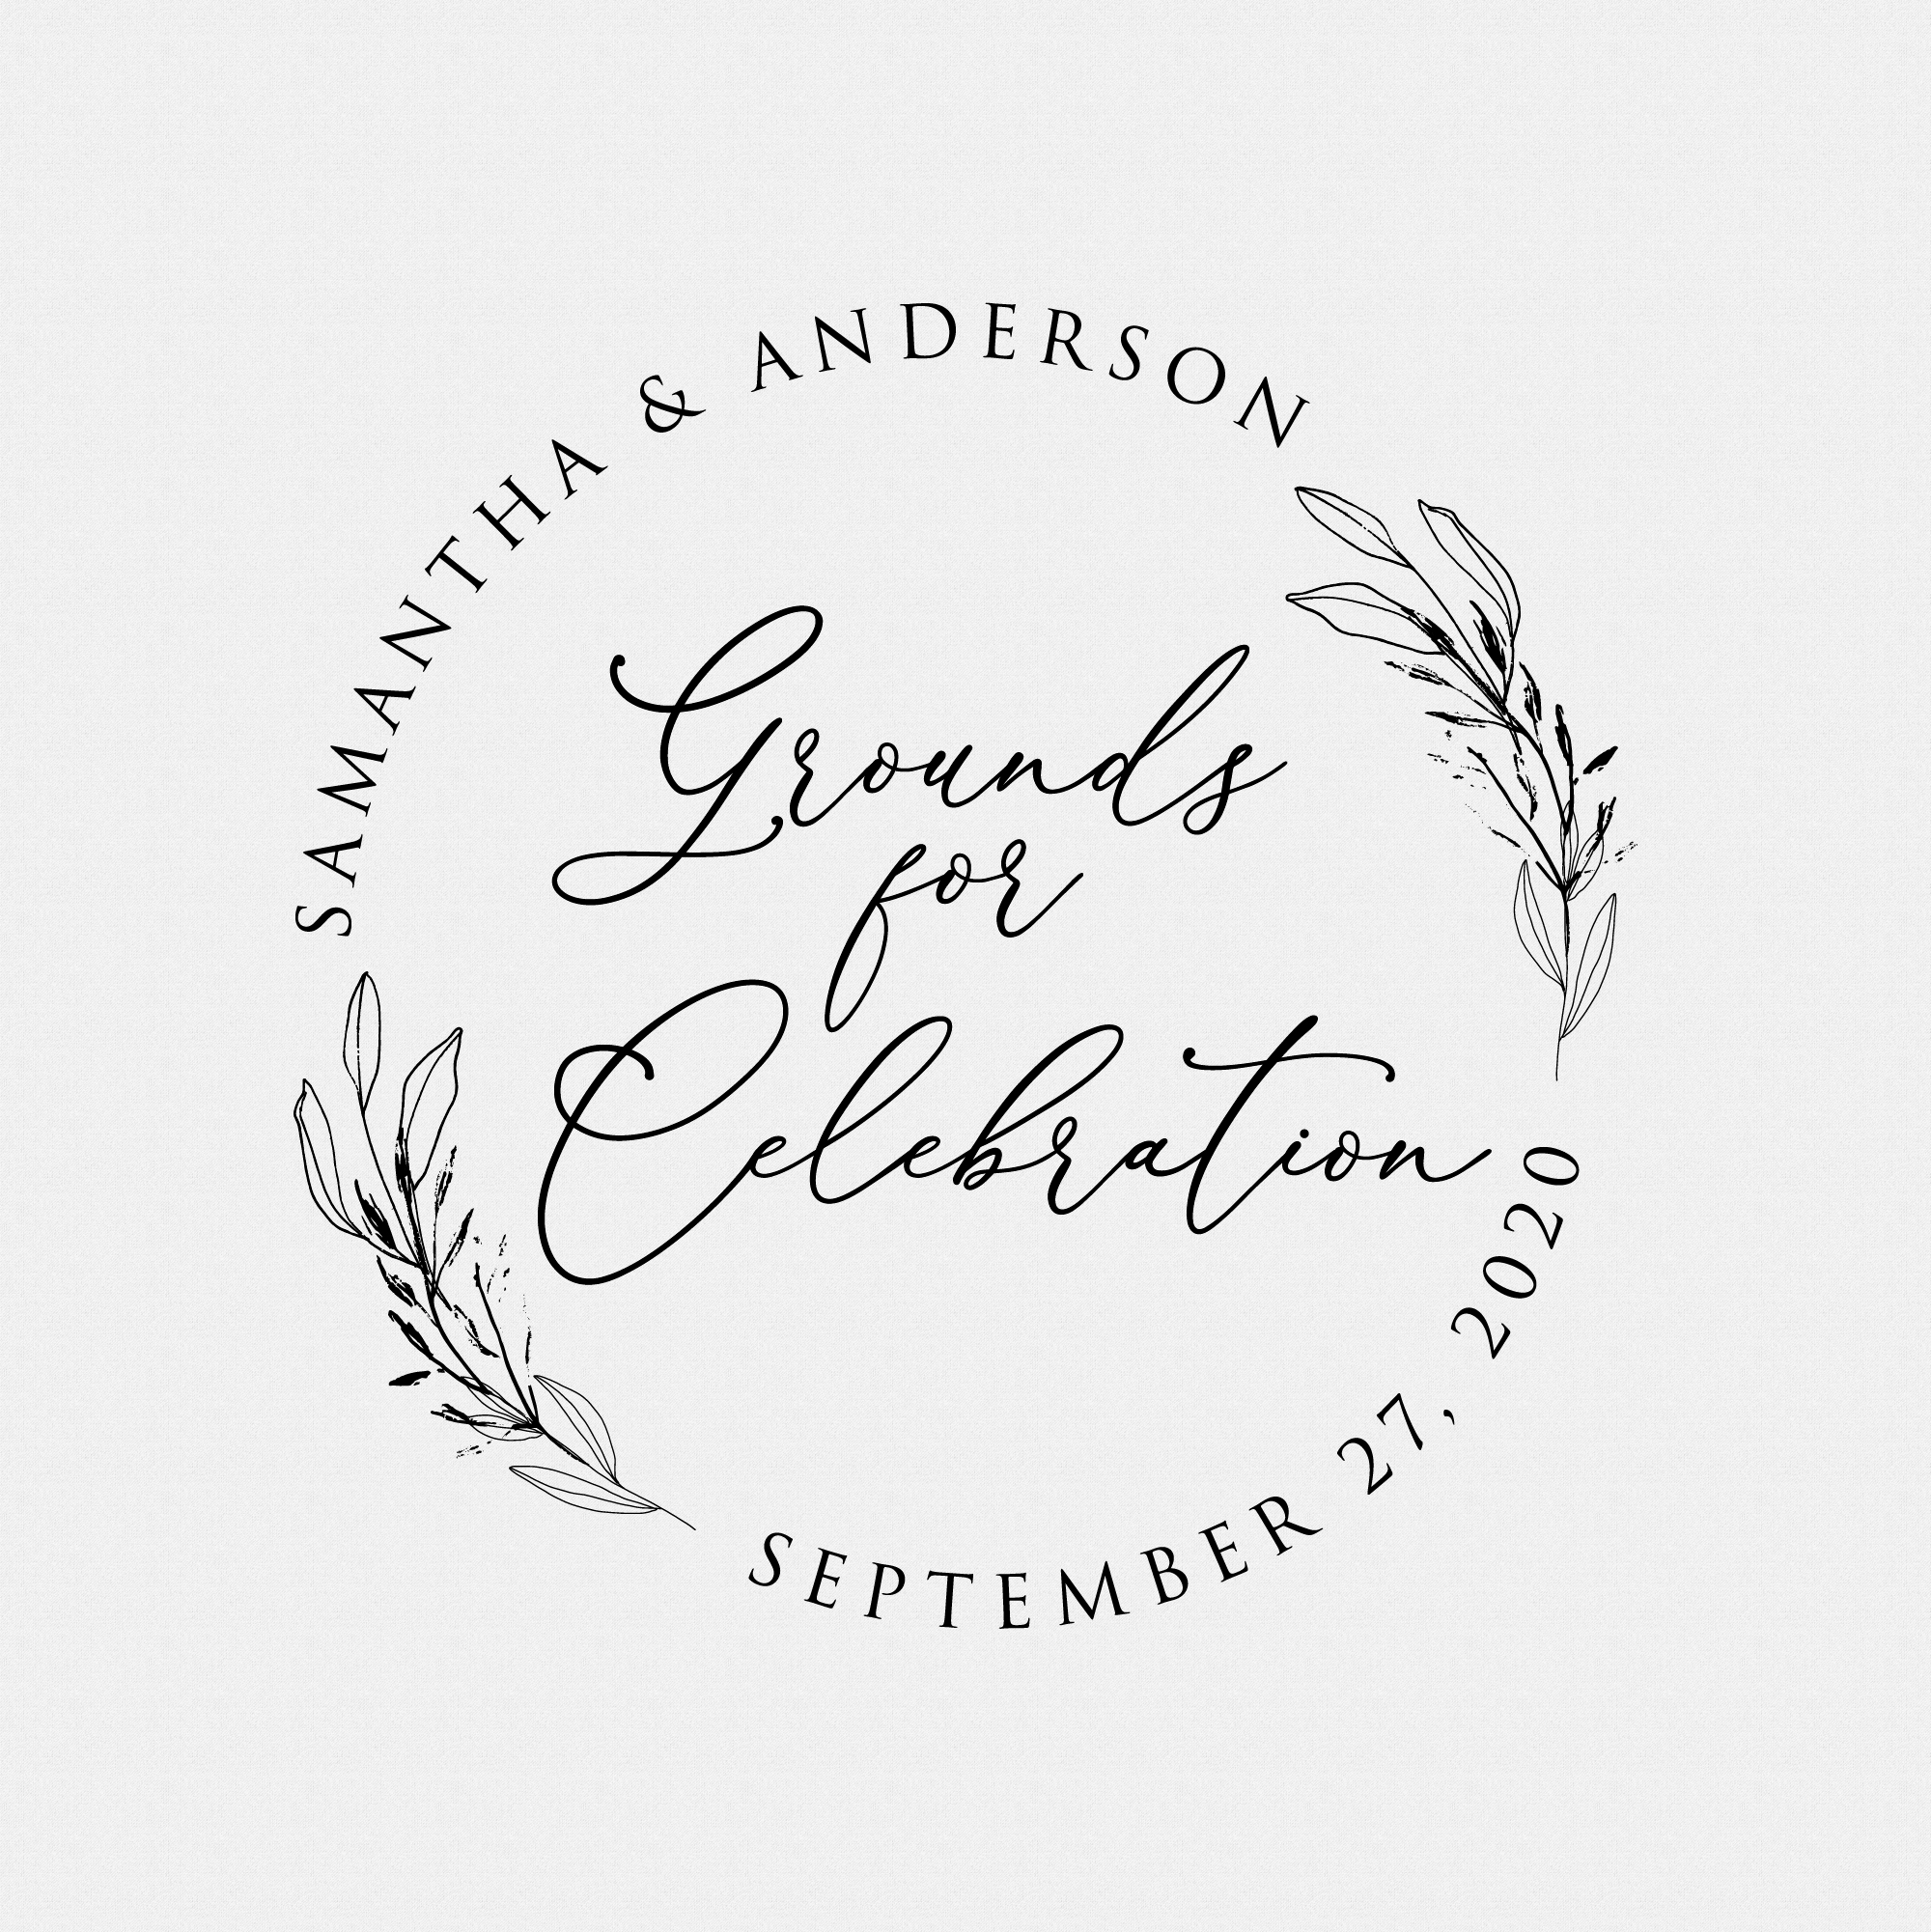 Grounds for Celebration Stamp, Grounds for Celebration, Coffee Wedding Favor Stamp, Wedding Favors, Wedding Favors Coffee, custom coffee stamp, personalized stamp wedding, grounds for celebration wedding favors, coffee favor grounds for celebration, grounds for celebration stamp - Style #T887